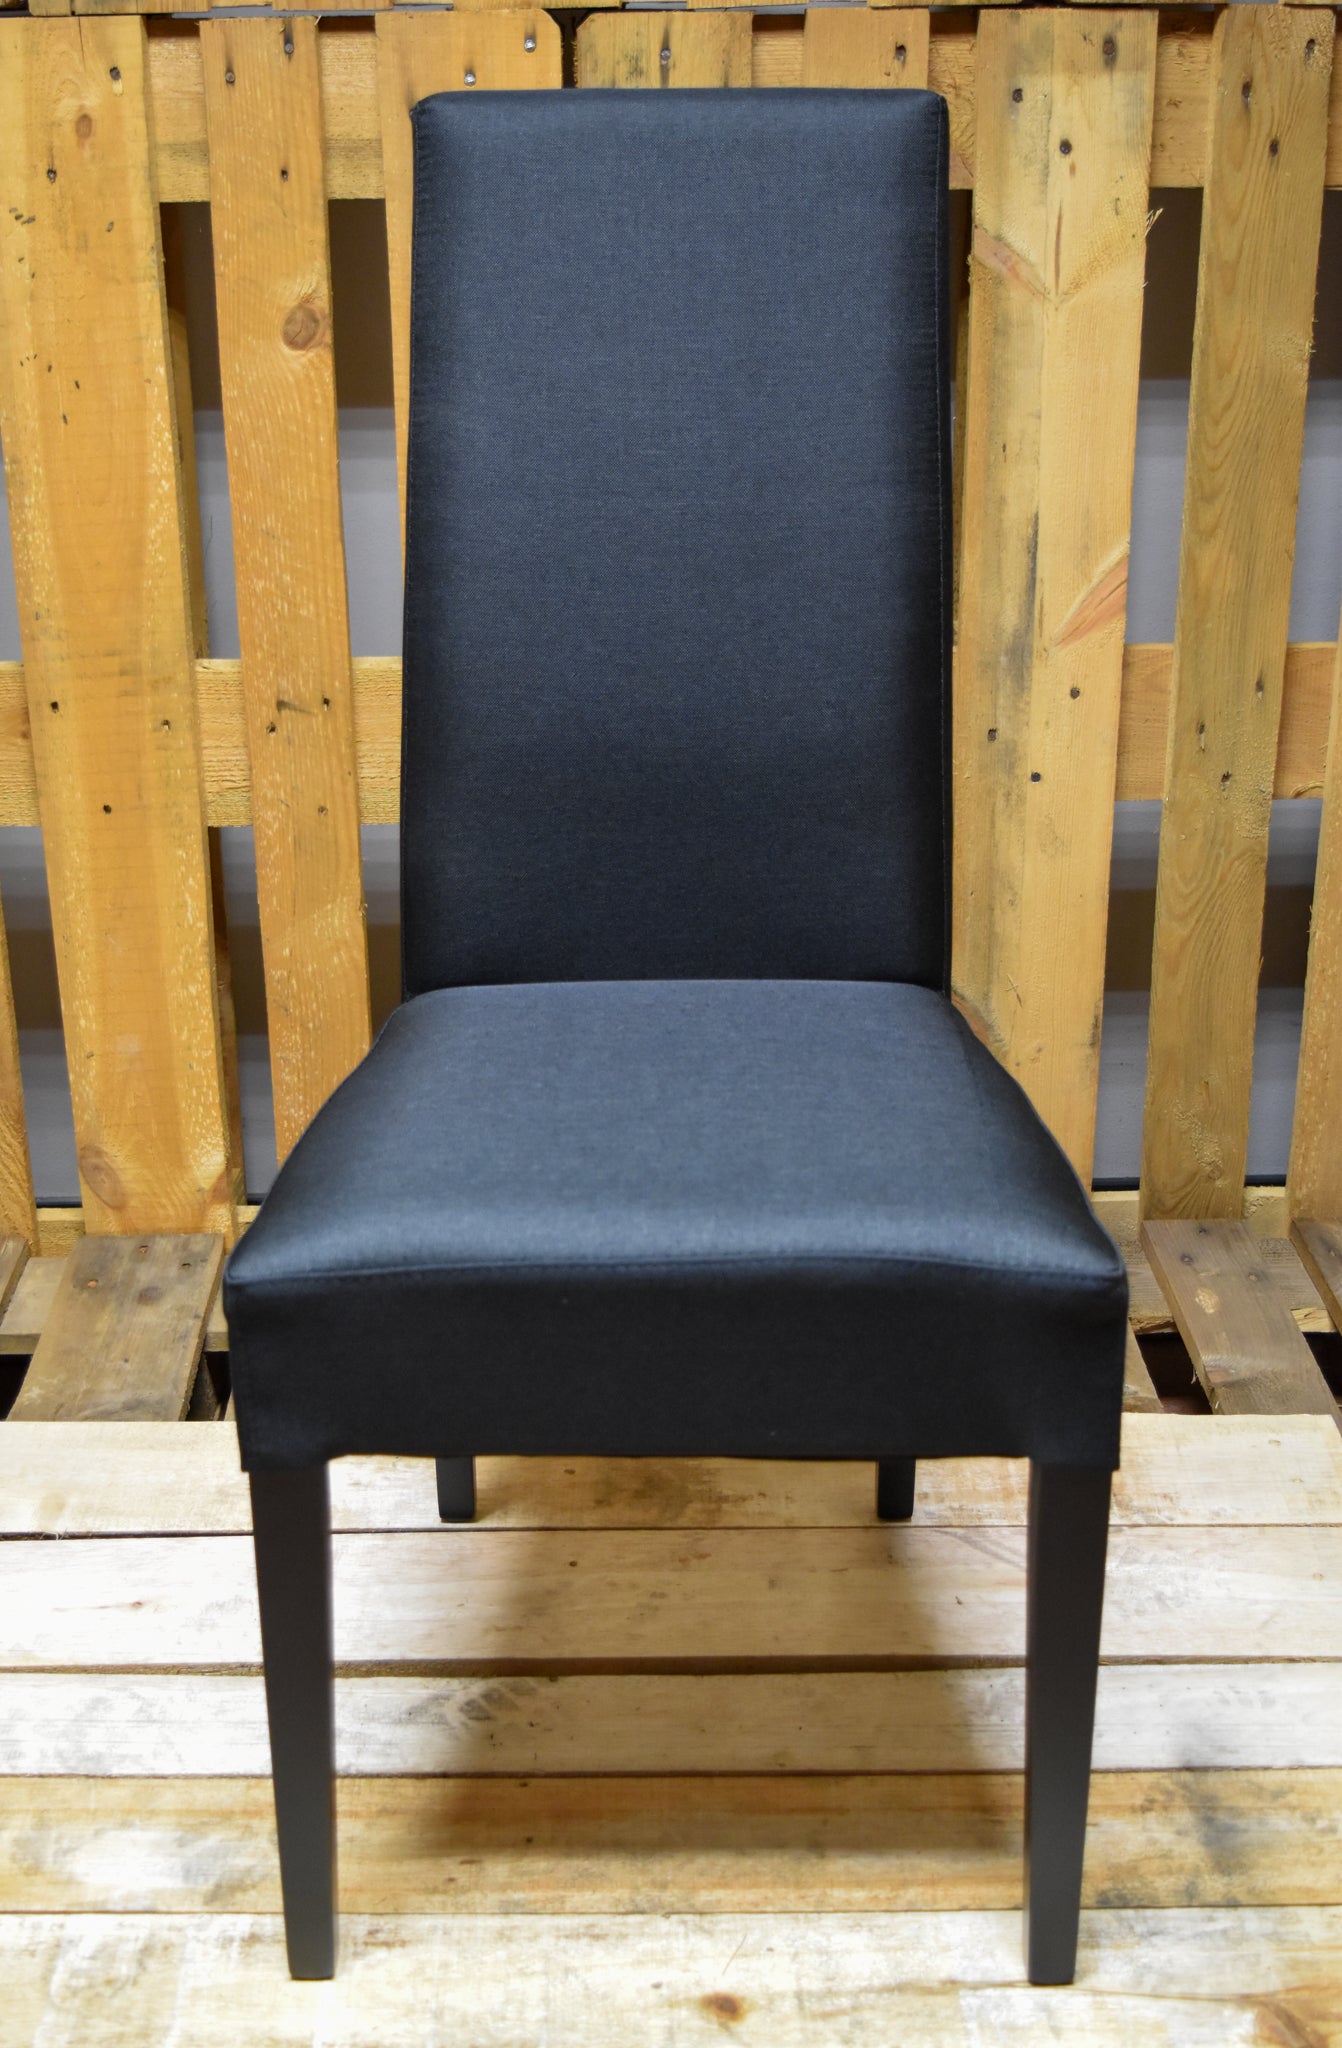 Stock model 36 chairs upholstered in black fabric